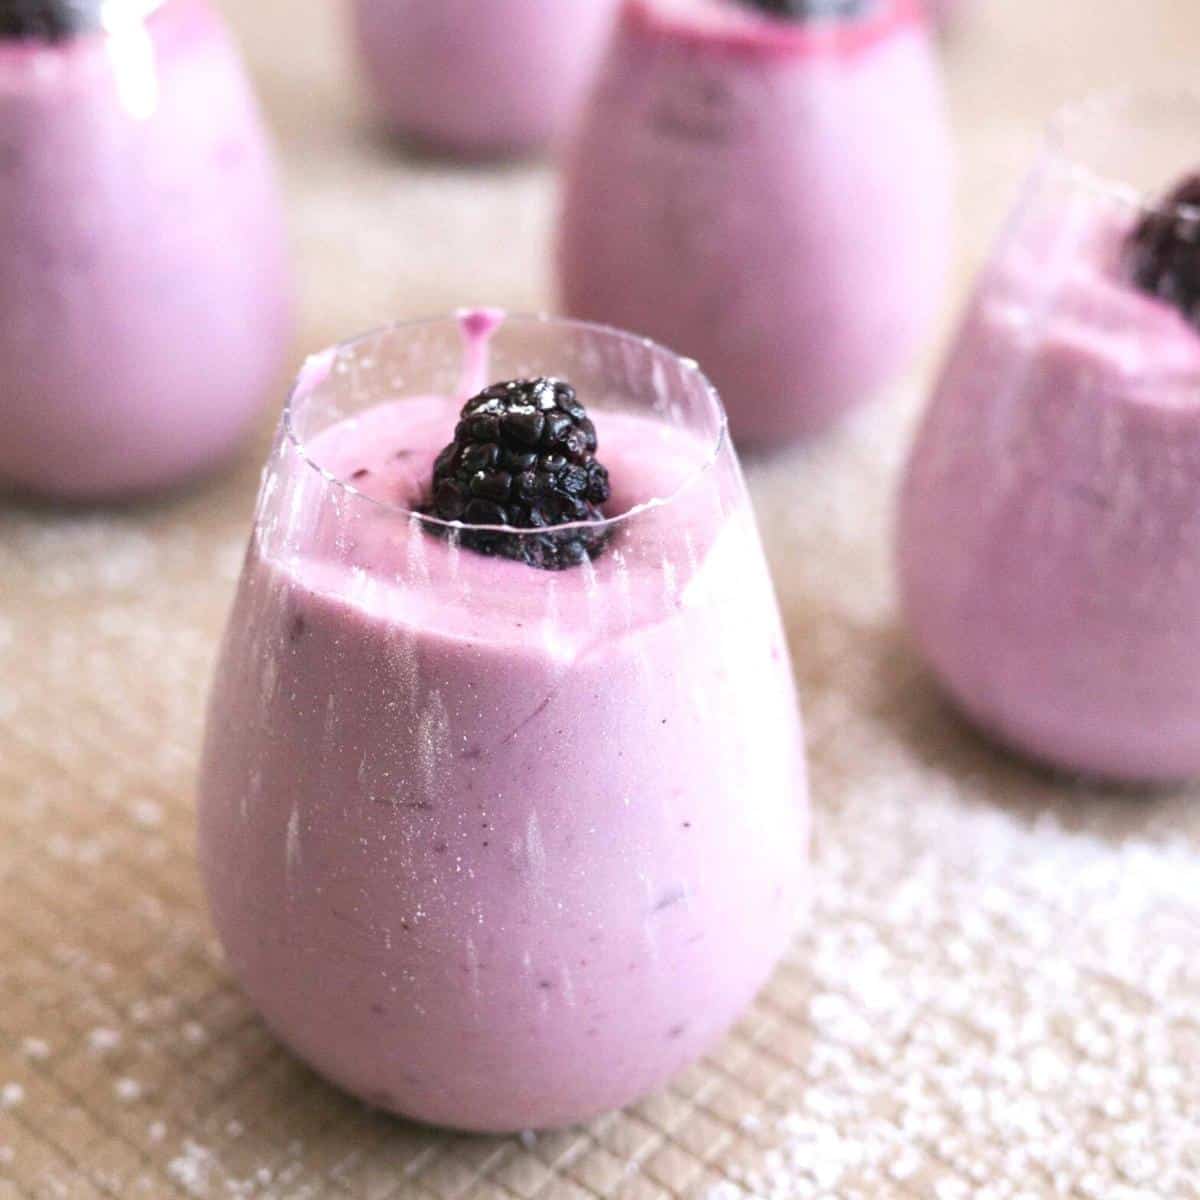 A glass with mousse and a blackberry